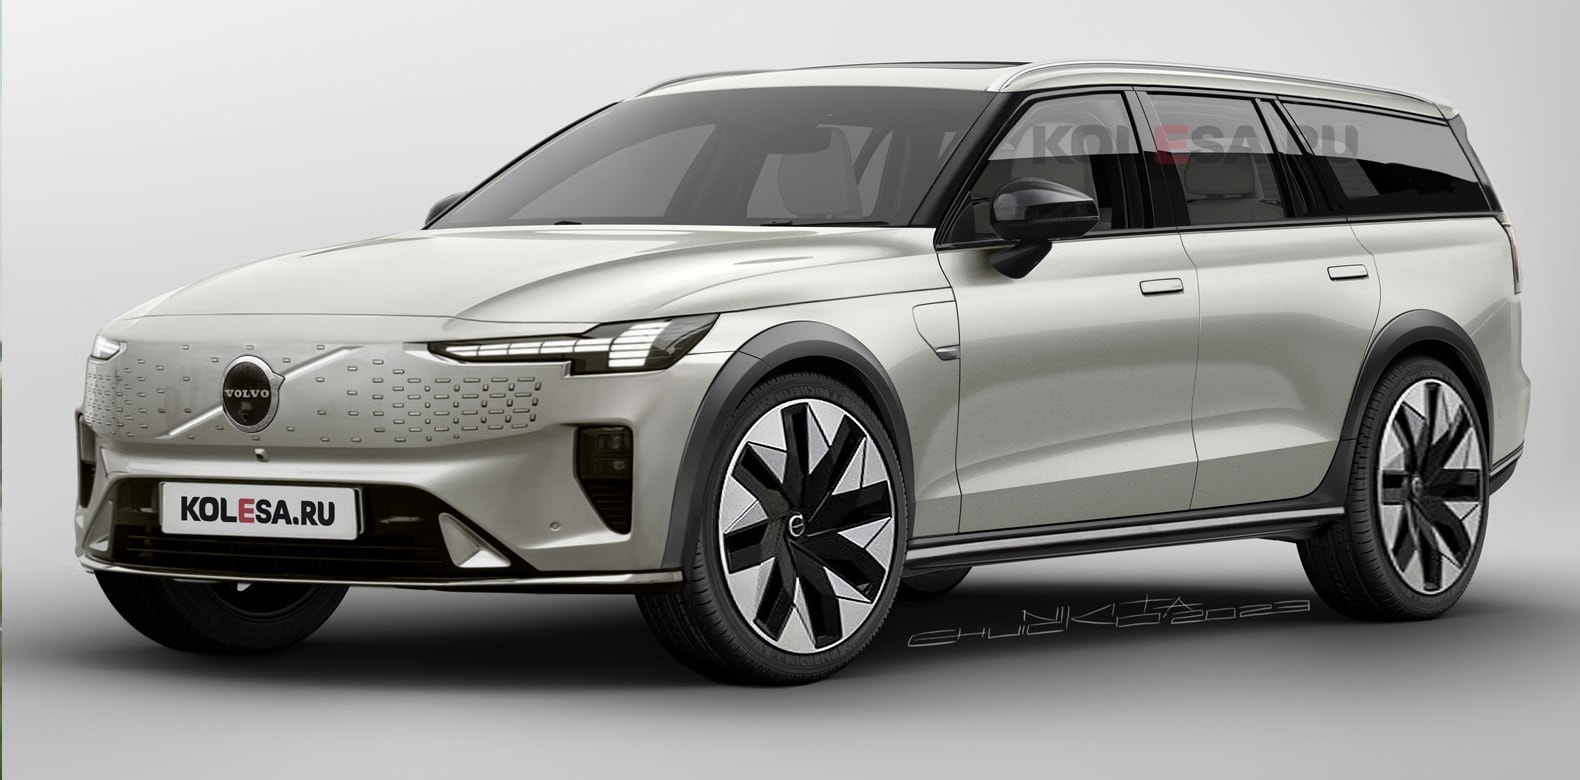 https://s1.cdn.autoevolution.com/images/news/digitally-electric-volvo-v90-cross-country-shows-that-cool-station-wagons-still-matter-224798_1.jpg